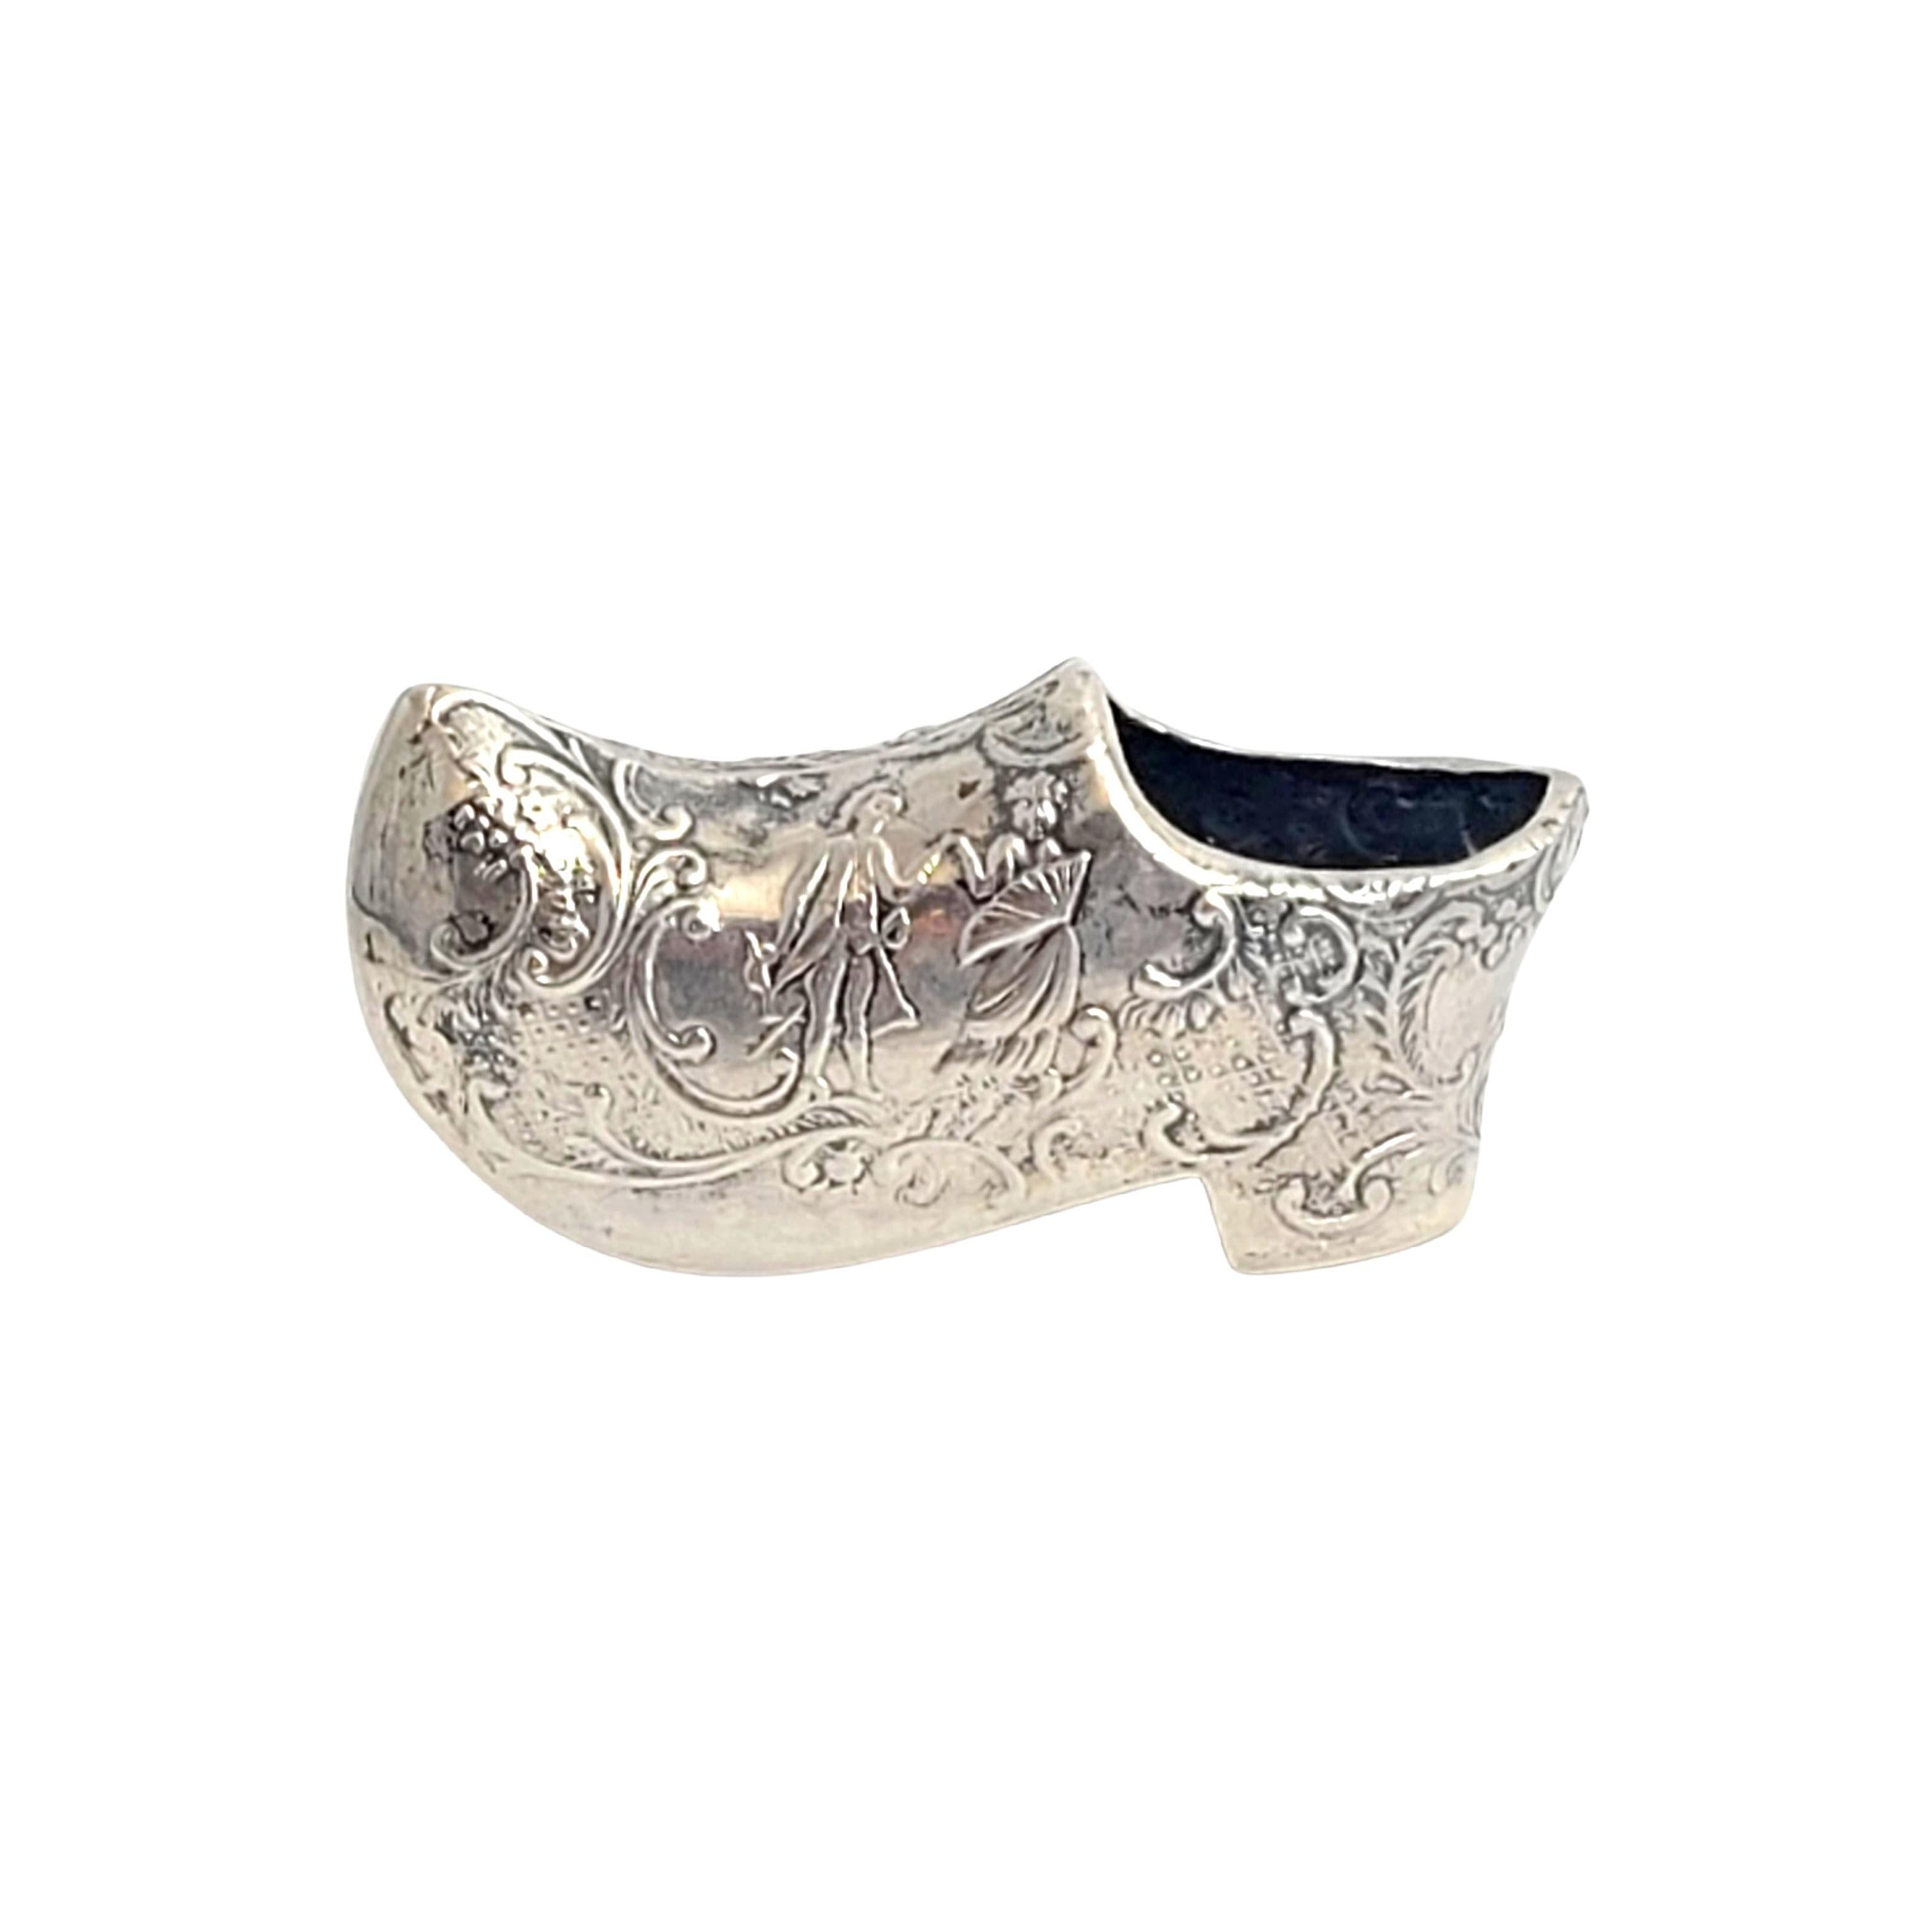 Dutch 835 silver clog.

This is a beautiful and charming small clog figurine is adorned with a repousse design.

Measures approx 2 1/2